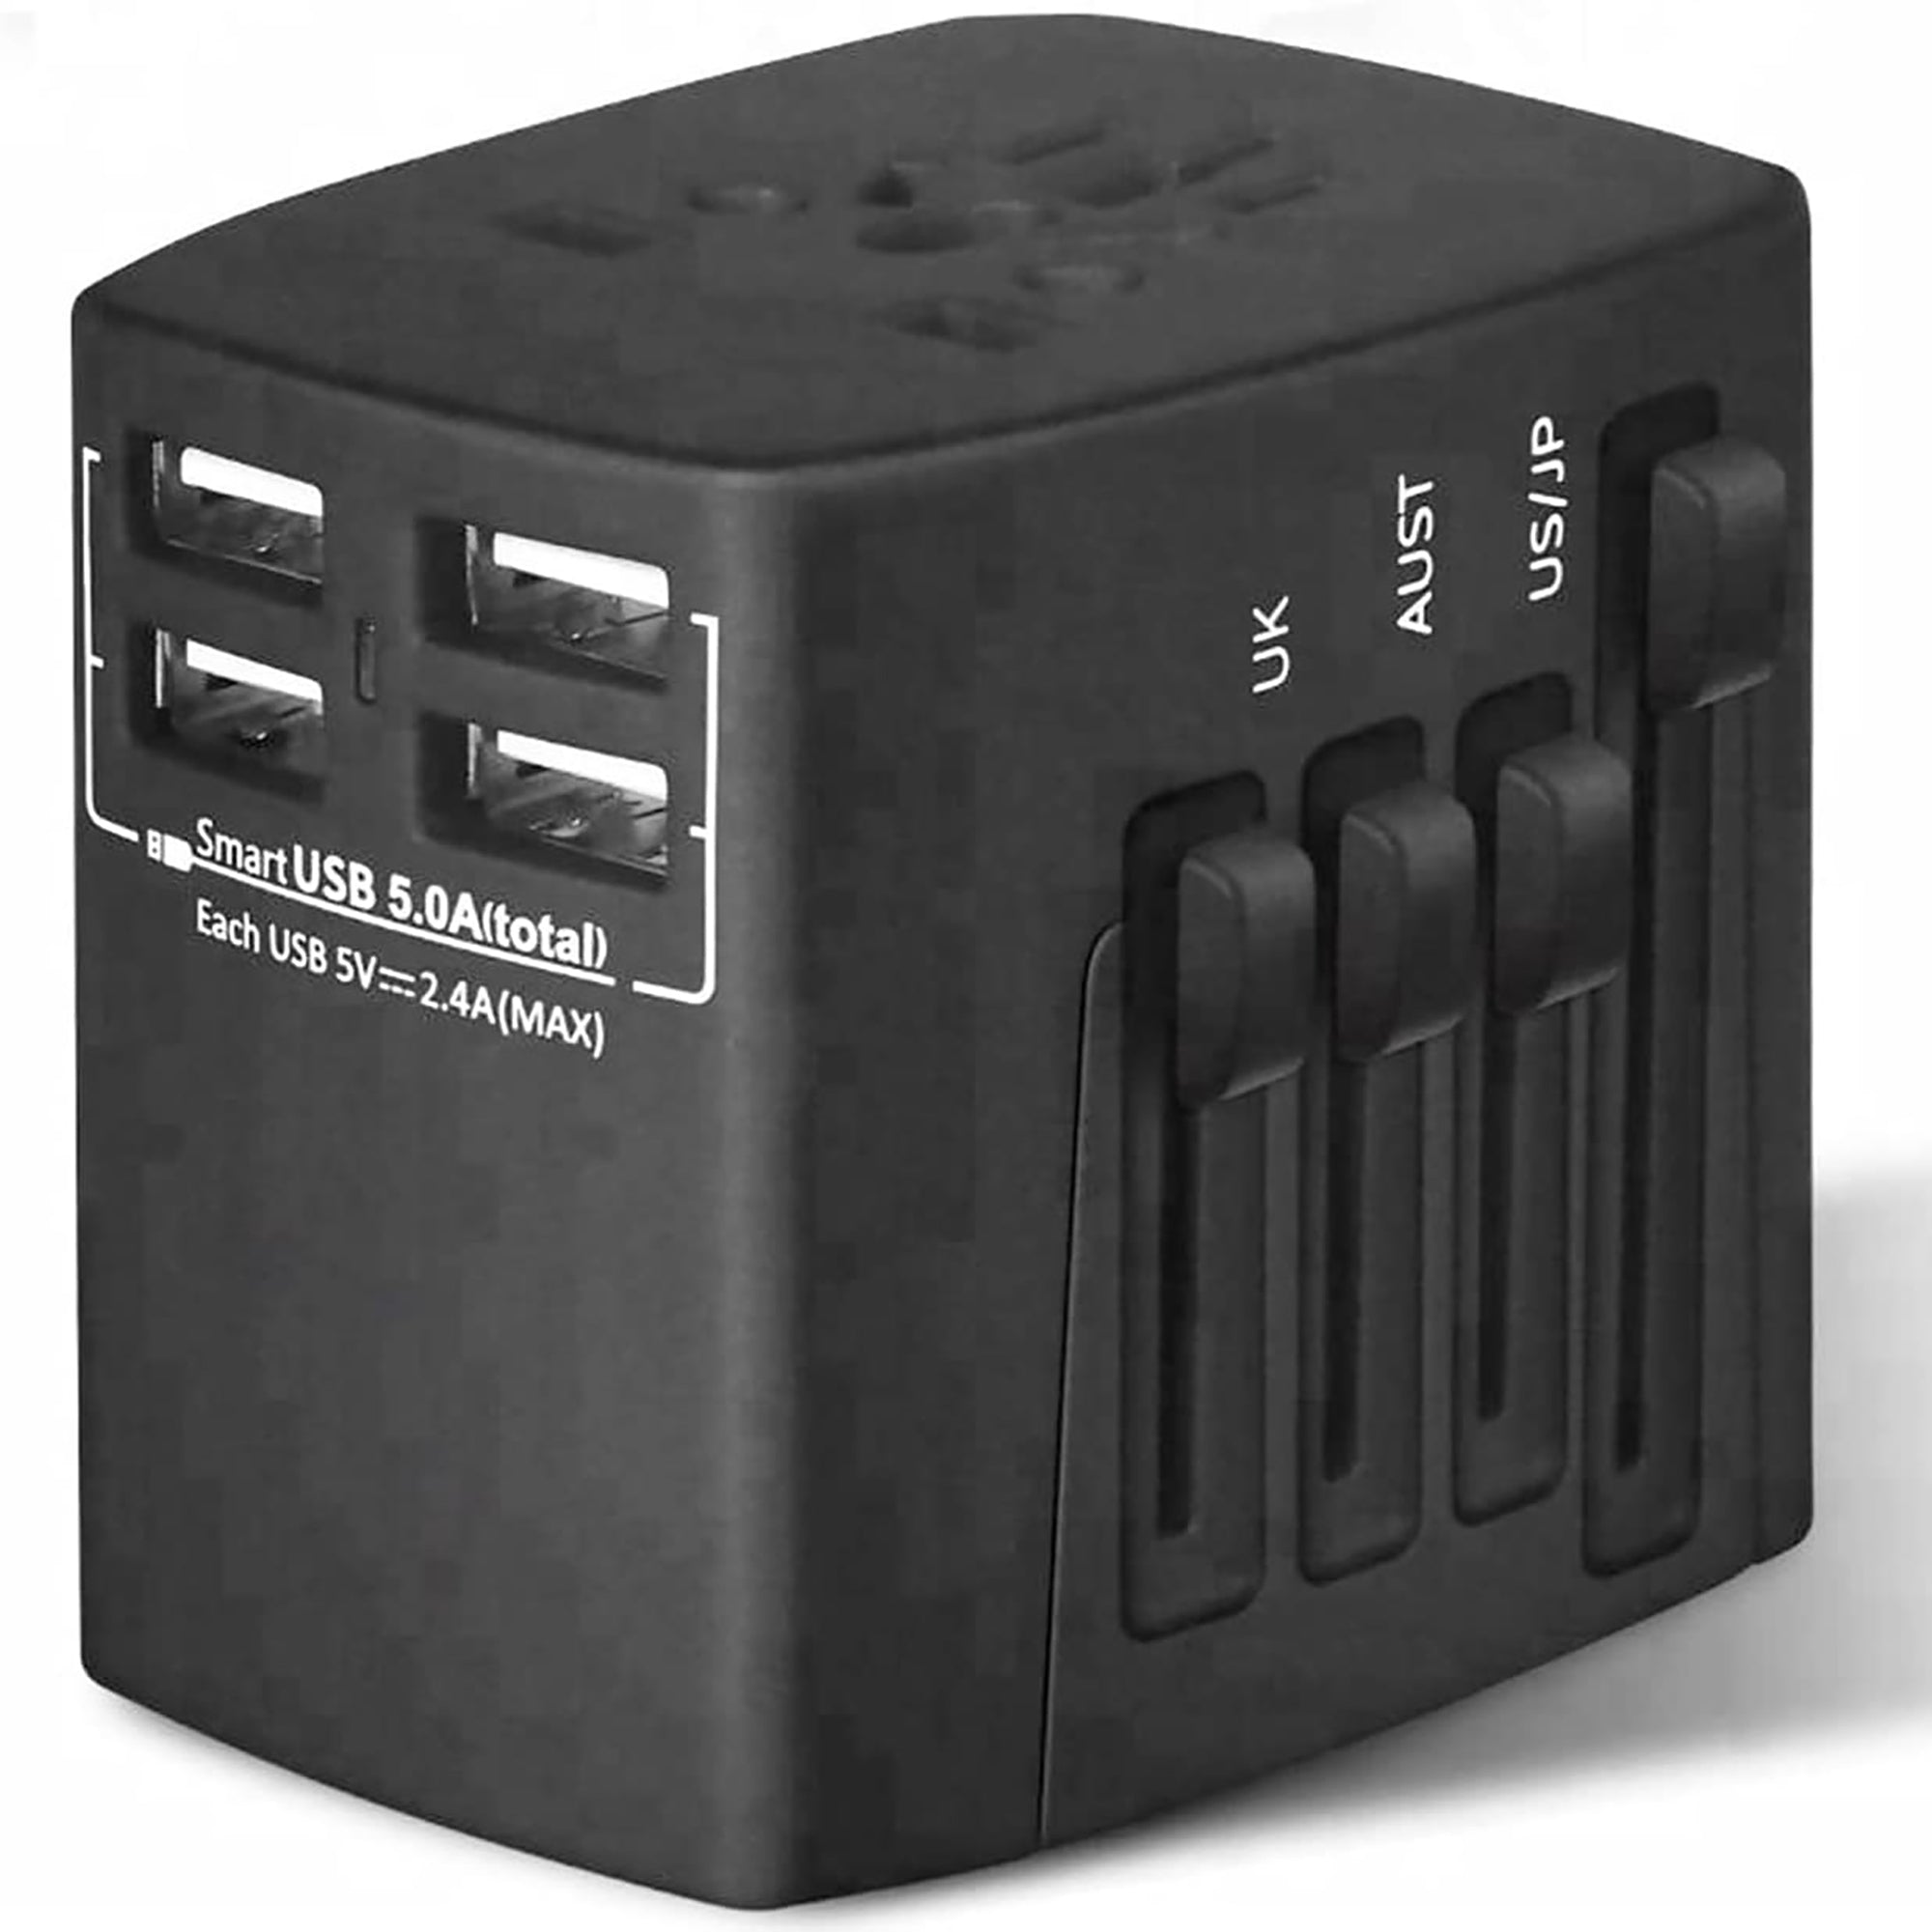 5 Core Travel Adapter 3 Pieces International Power Adapter Plug Multi Outlet Port 4 USB Travel Charger Universal AC Plug Outlet Adapter- UTA 3pcs BRW